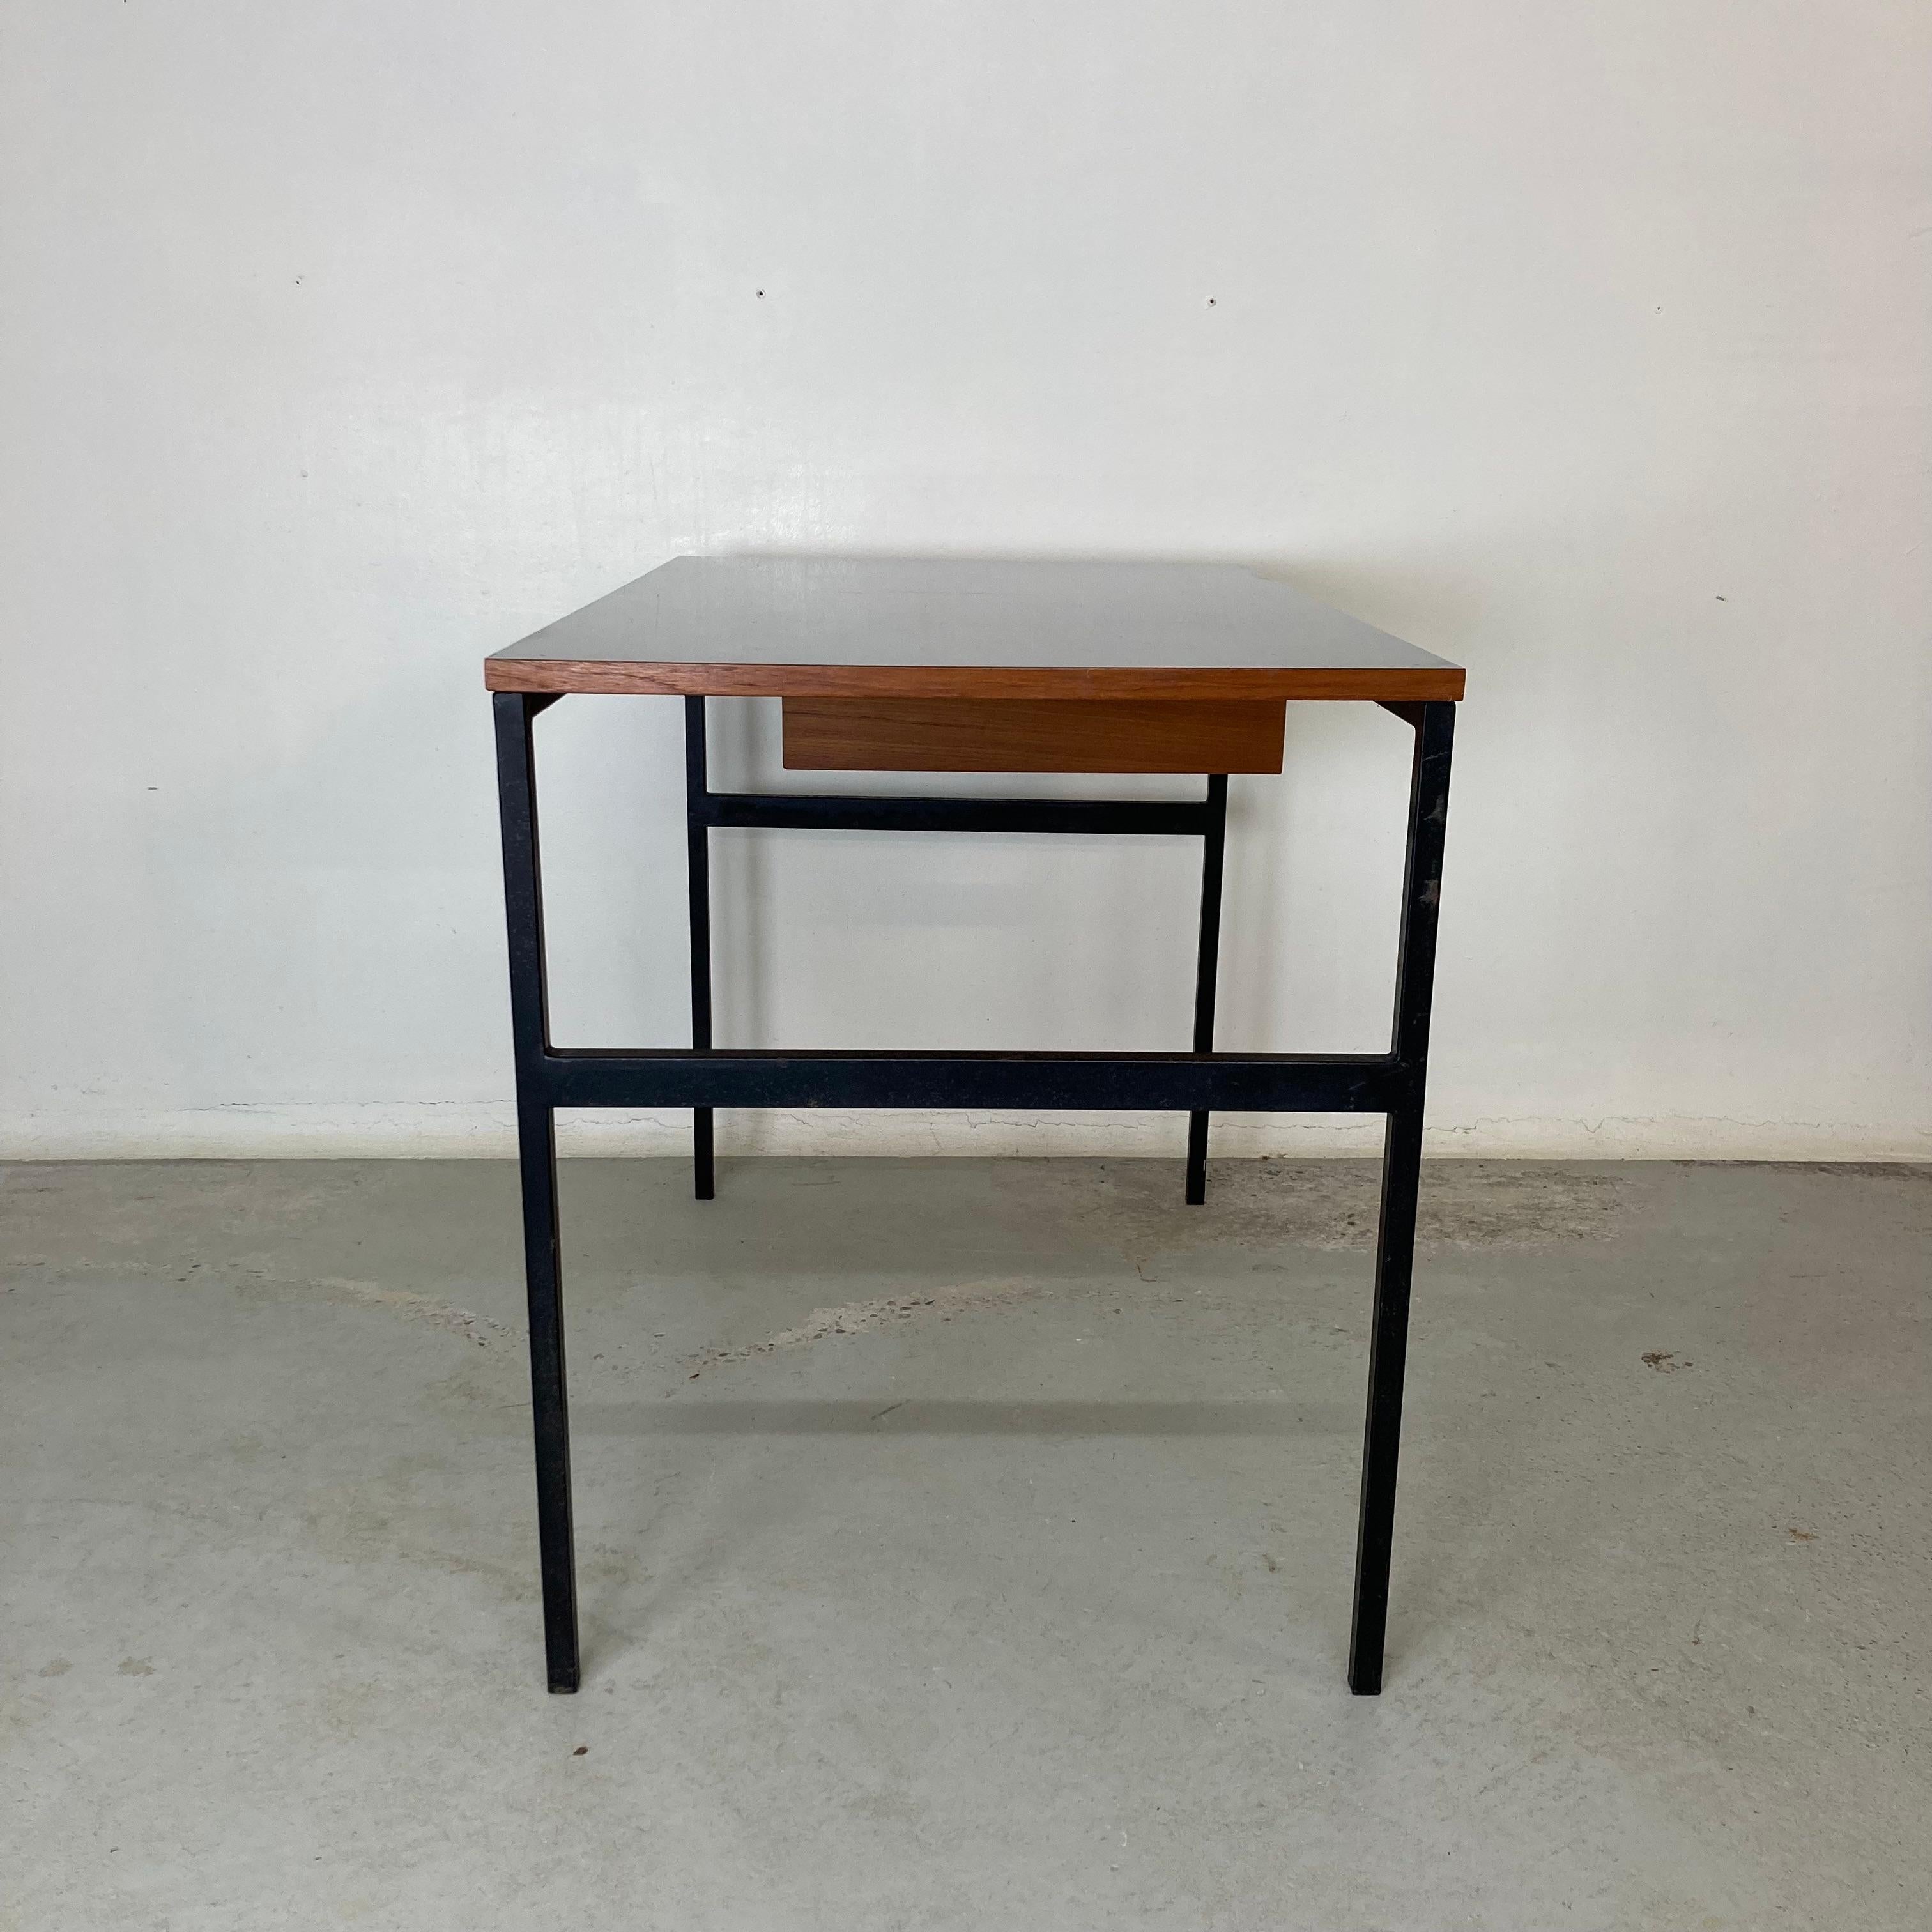 Pierre Paulin & Thonet Desk with Drawer, Metal Teak & Formica, France Circa 1955 In Good Condition For Sale In La Teste De Buch, FR